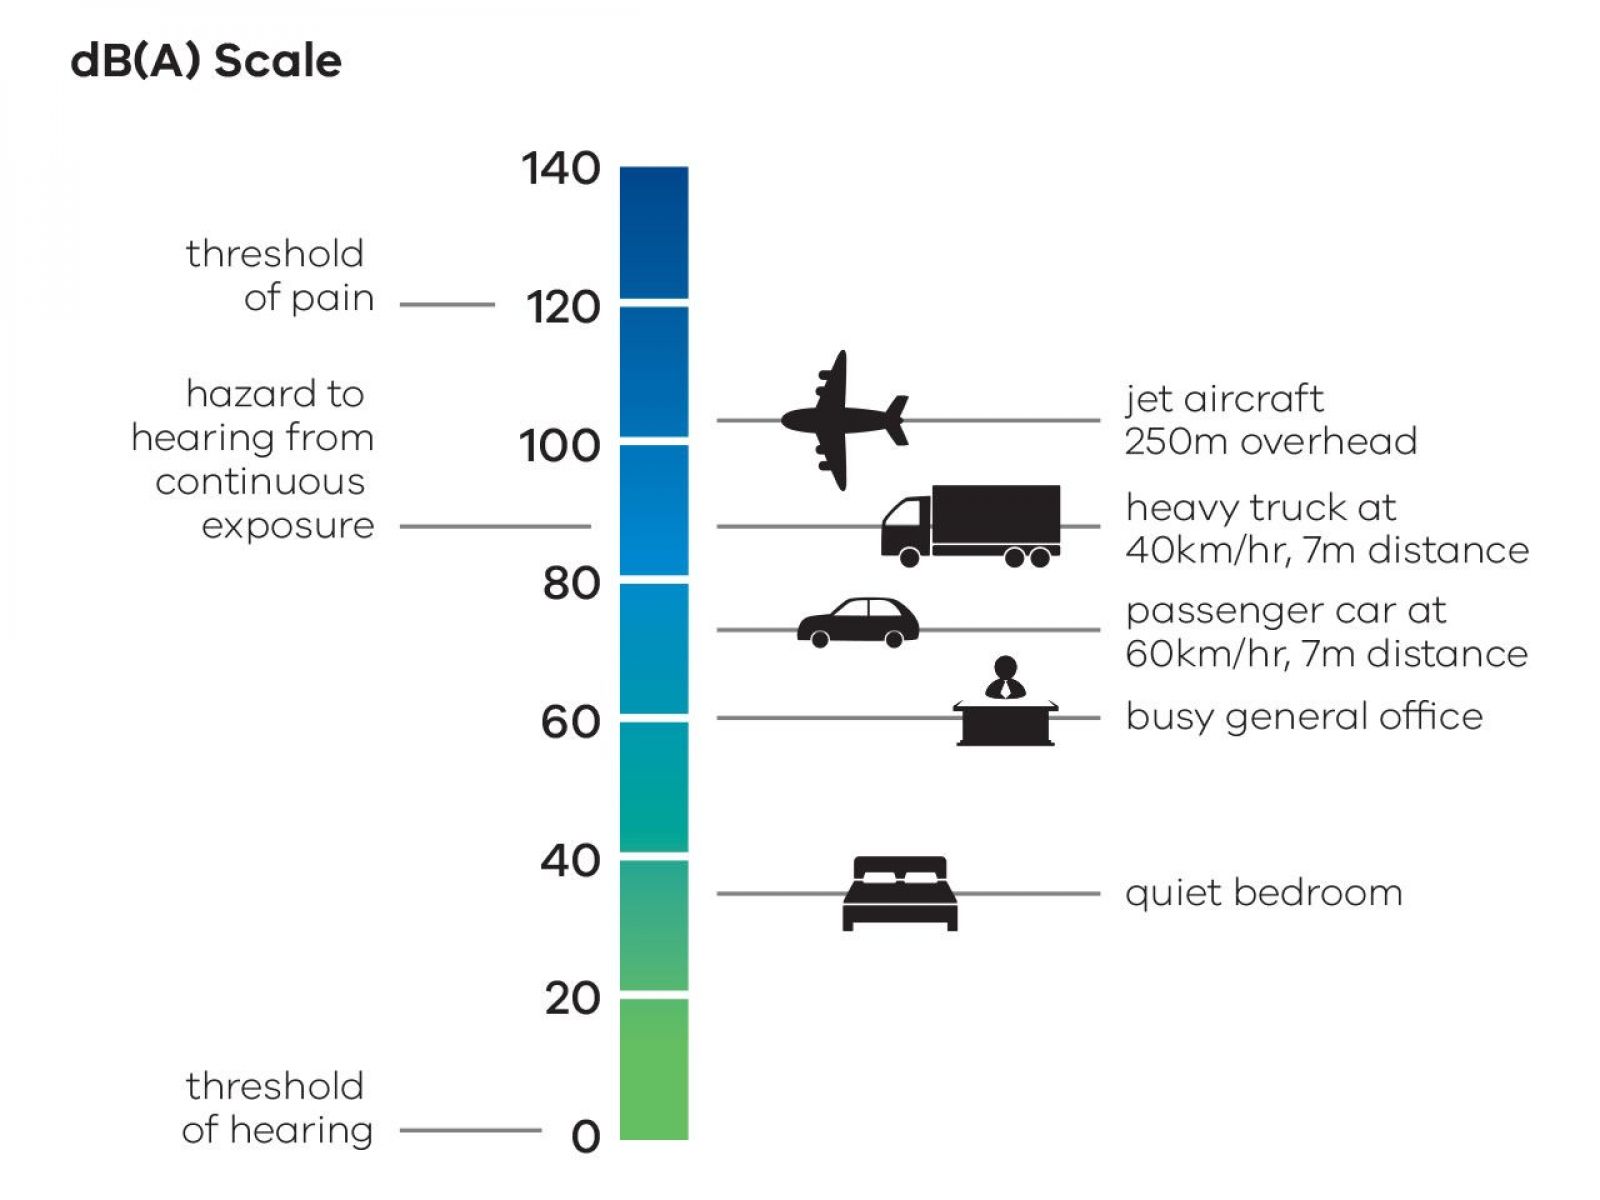 A pictorial depiction of the dB(A) Scale measuring noise levels typically experienced in different environments. Moving up the scale in ascending levels of noise: about 38dB(A) is equvialent to the noise level experienced in a quiet bedroom, a busy general office is at a noise level of 60dB(A), a passenger car at 60km/hr at a 7m distance is at approximately 76 dB(A).  For a heavy truck travelling at 40km/h, at a distance of 7m, the noise level is at 90 dB(A), while a jet aircraft flying 250m overhead is at 105dB(A). Continuous exposure to noise levels above 85dB(A) may be a hazard to hearing, with the threshold of pain at 120db(A).